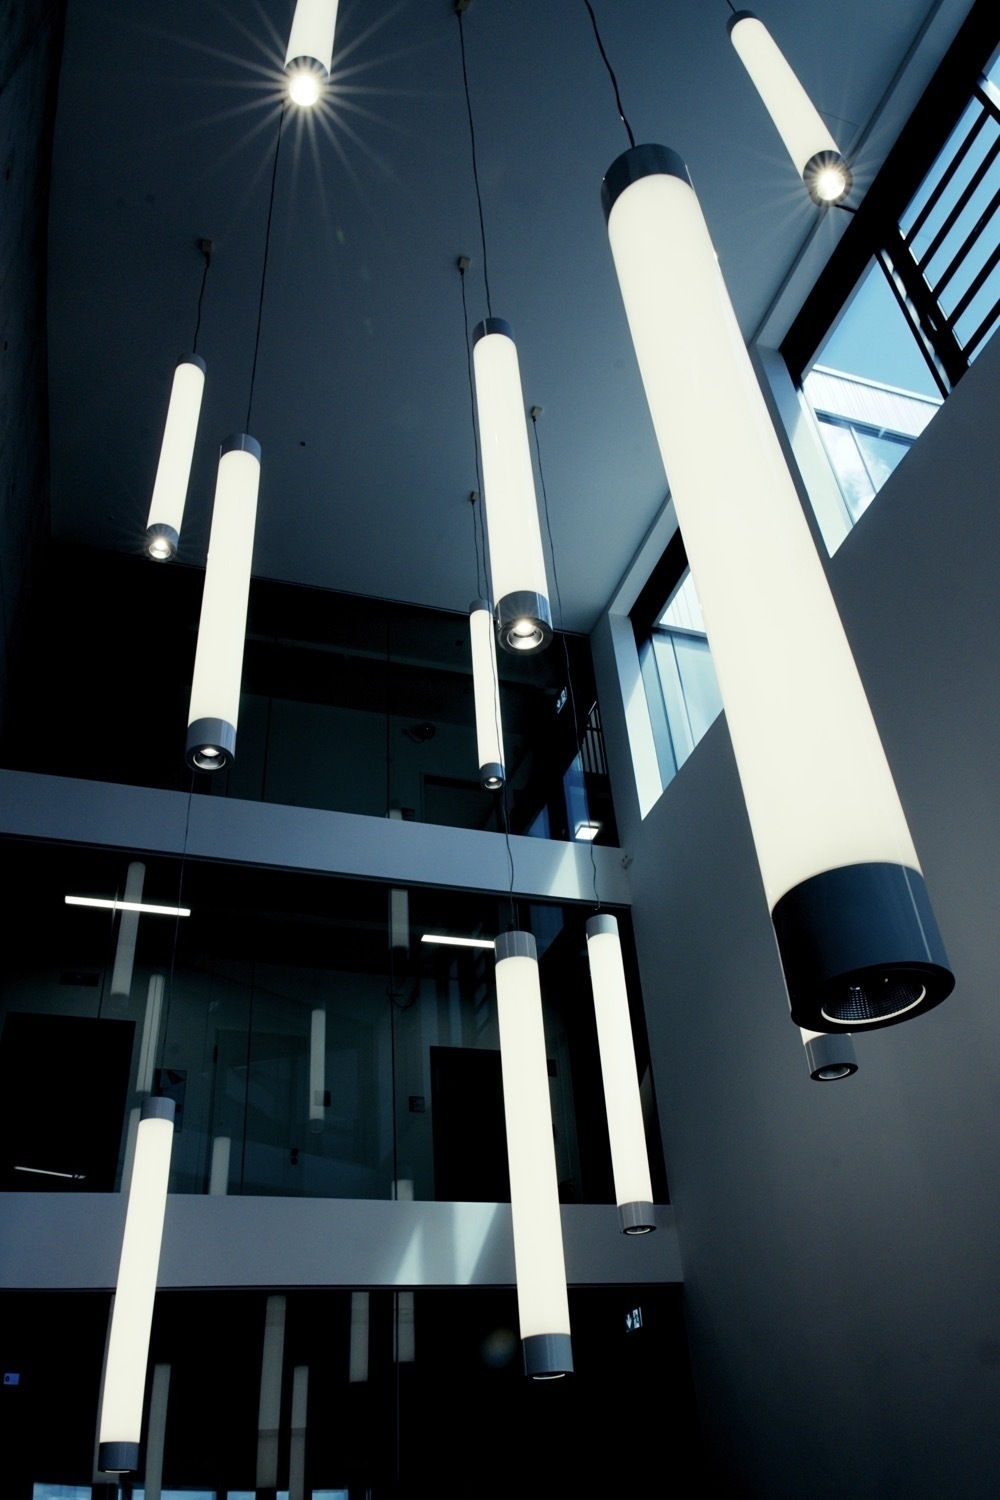 Several rod lamps hang from the ceiling at different heights in a multi-storey room. The lamps also have a spotlight facing down, from which the light radiates in the shape of a star.